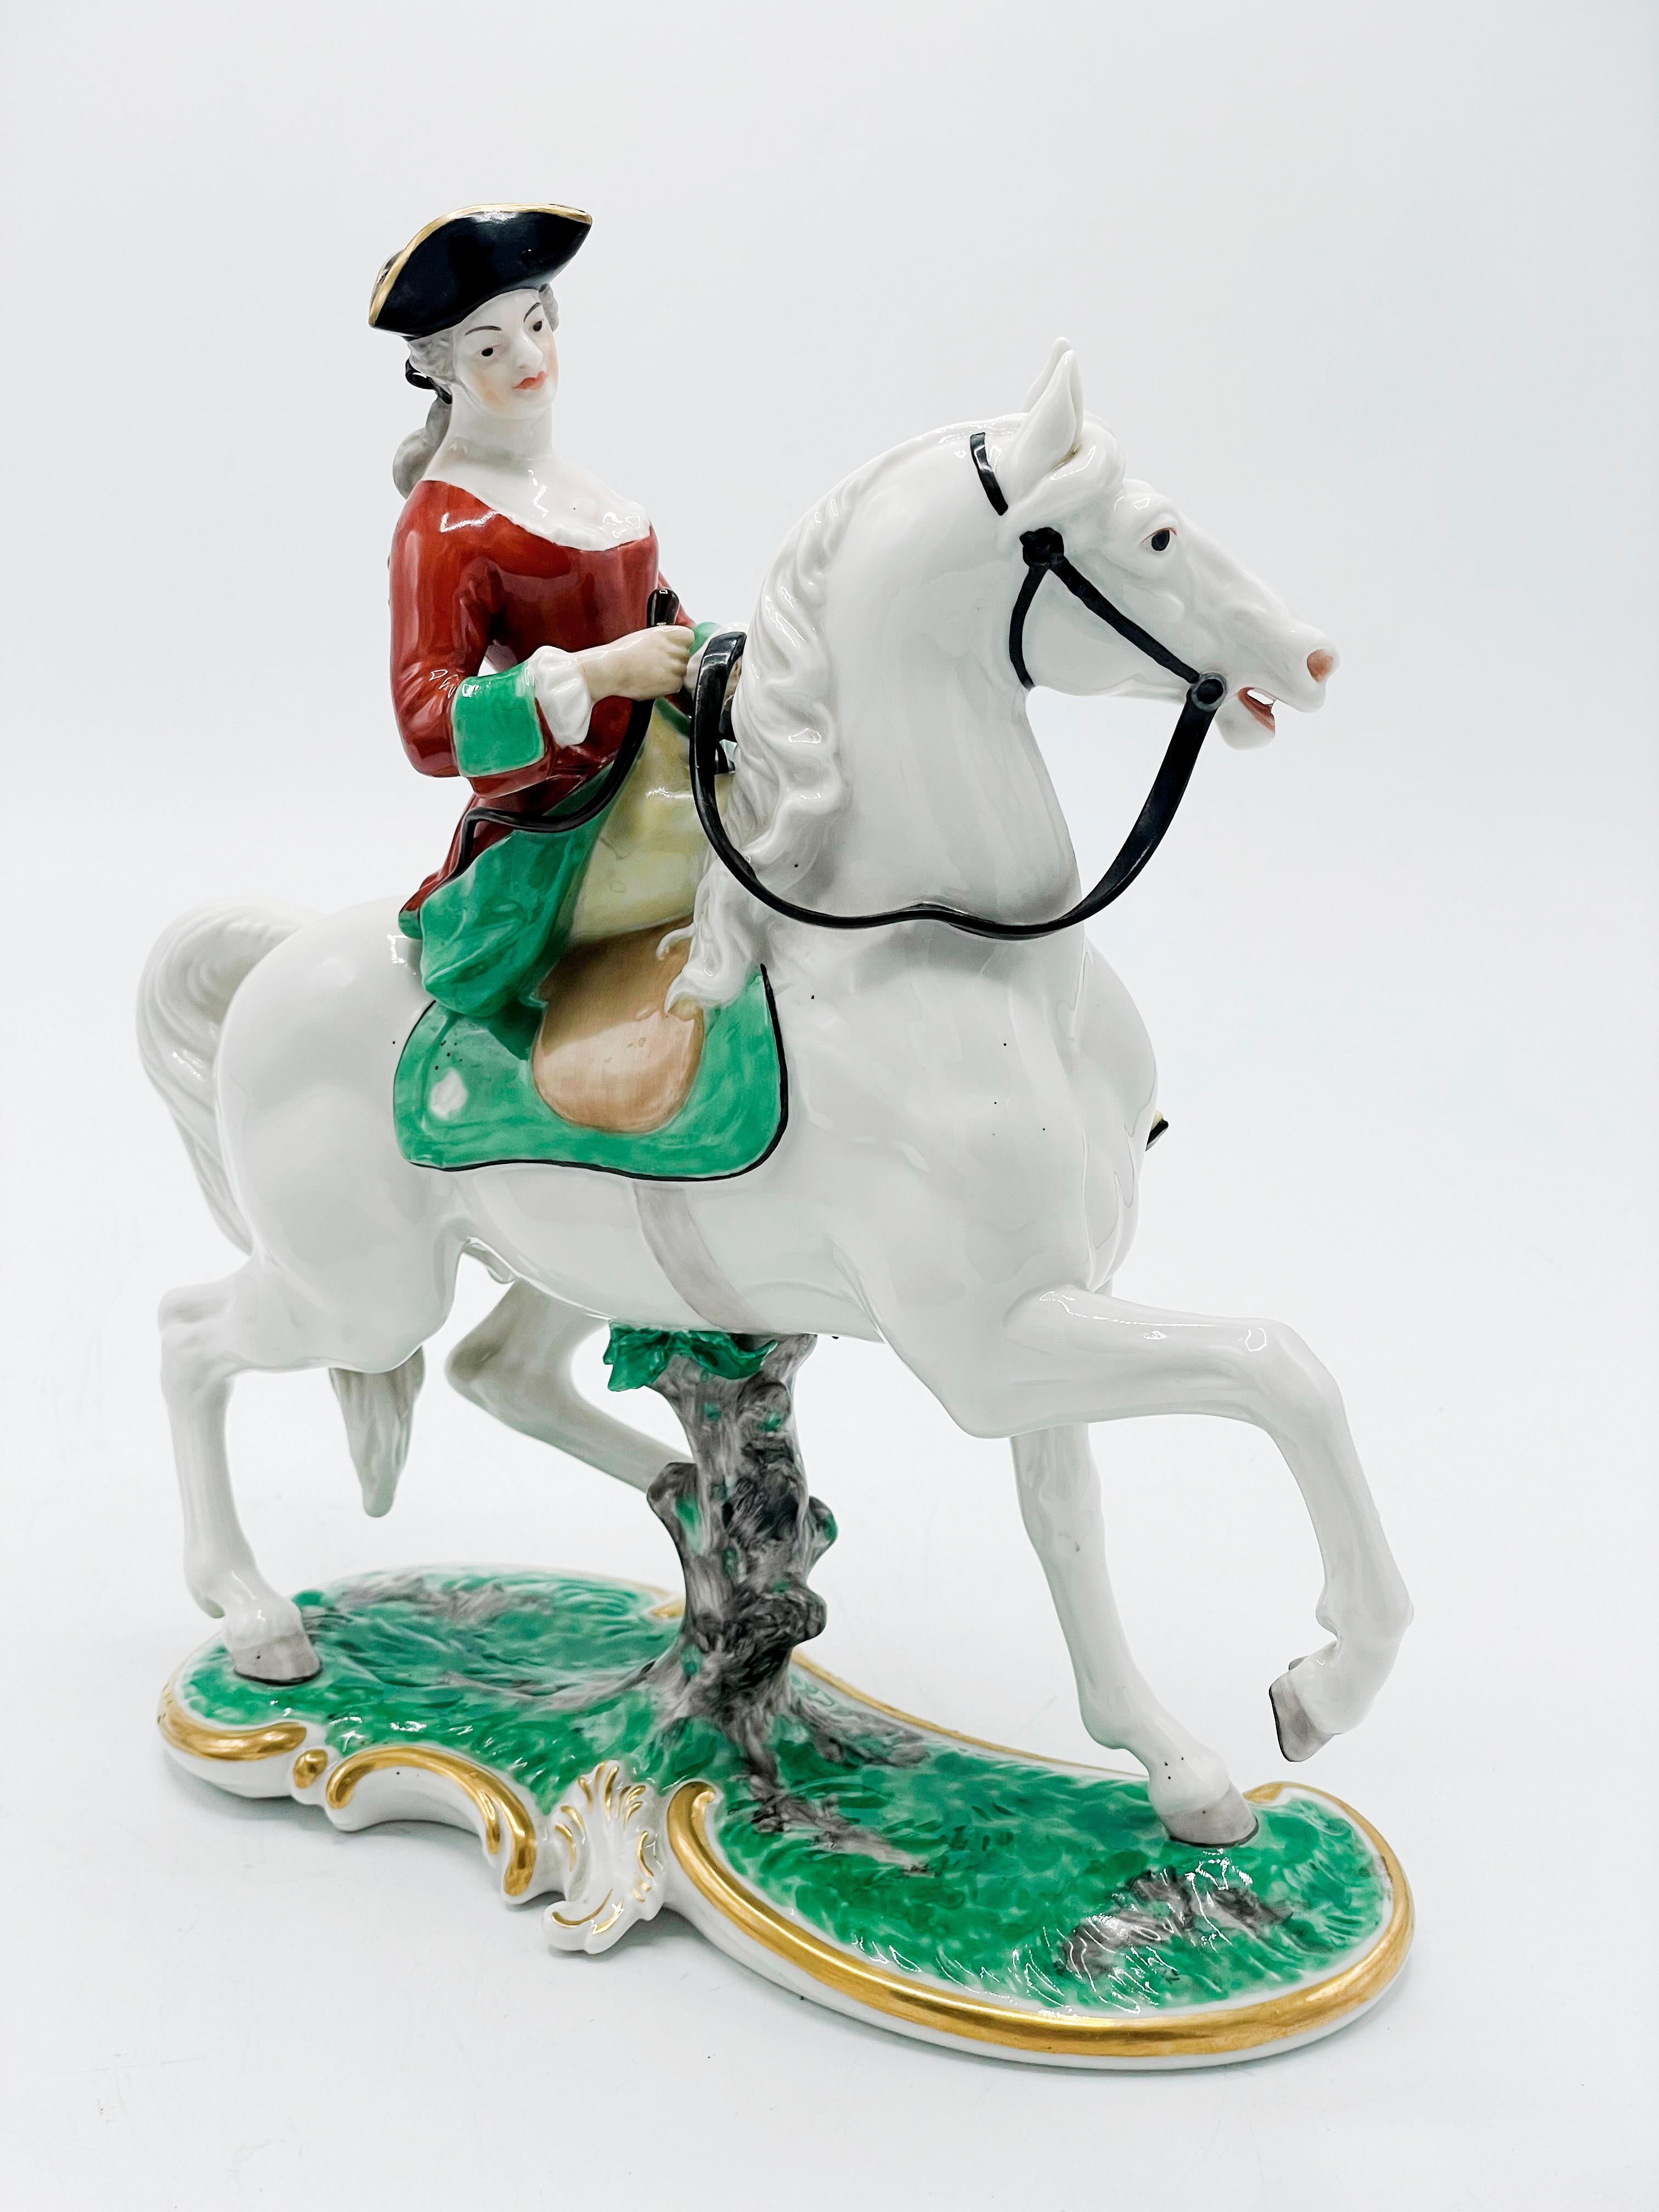 Theodor Kärner Hohenberg/Eger 1885 - Munich 1966

Figure 'Hunting rider Princess Margarethe v. Thurn and Taxis'

Nymphenburg, 20th century. Designed in 1915. Lady in hunting costume on horseback. Kärner's 